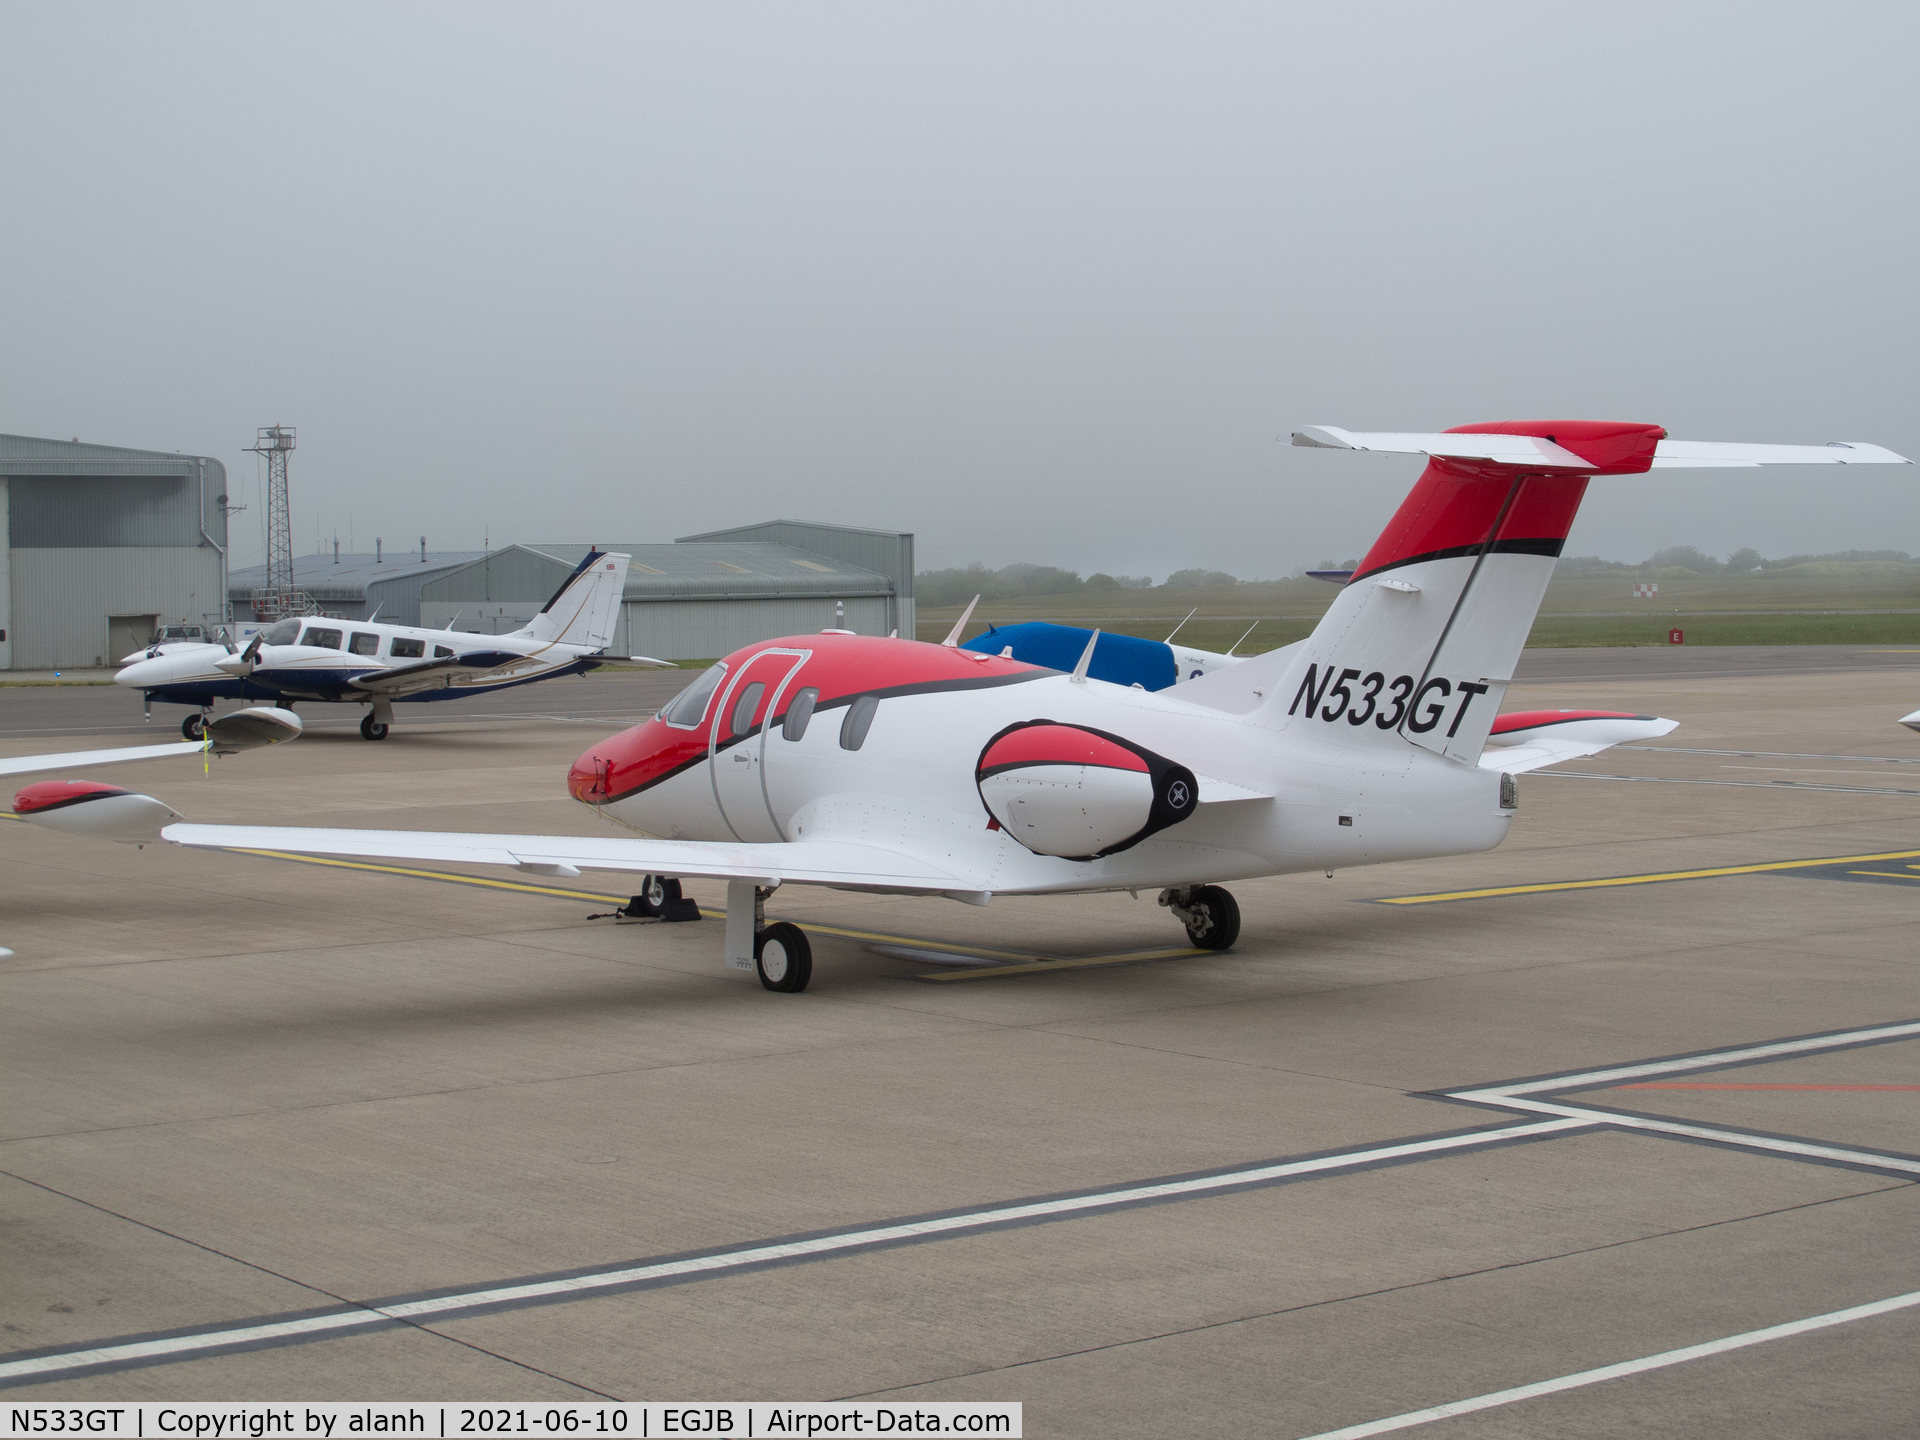 N533GT, 2011 Eclipse Aviation Corp EA500 C/N 000267, Recent addition to the Channel Jets fleet, parked at Guernsey after a transatlantic ferry flight